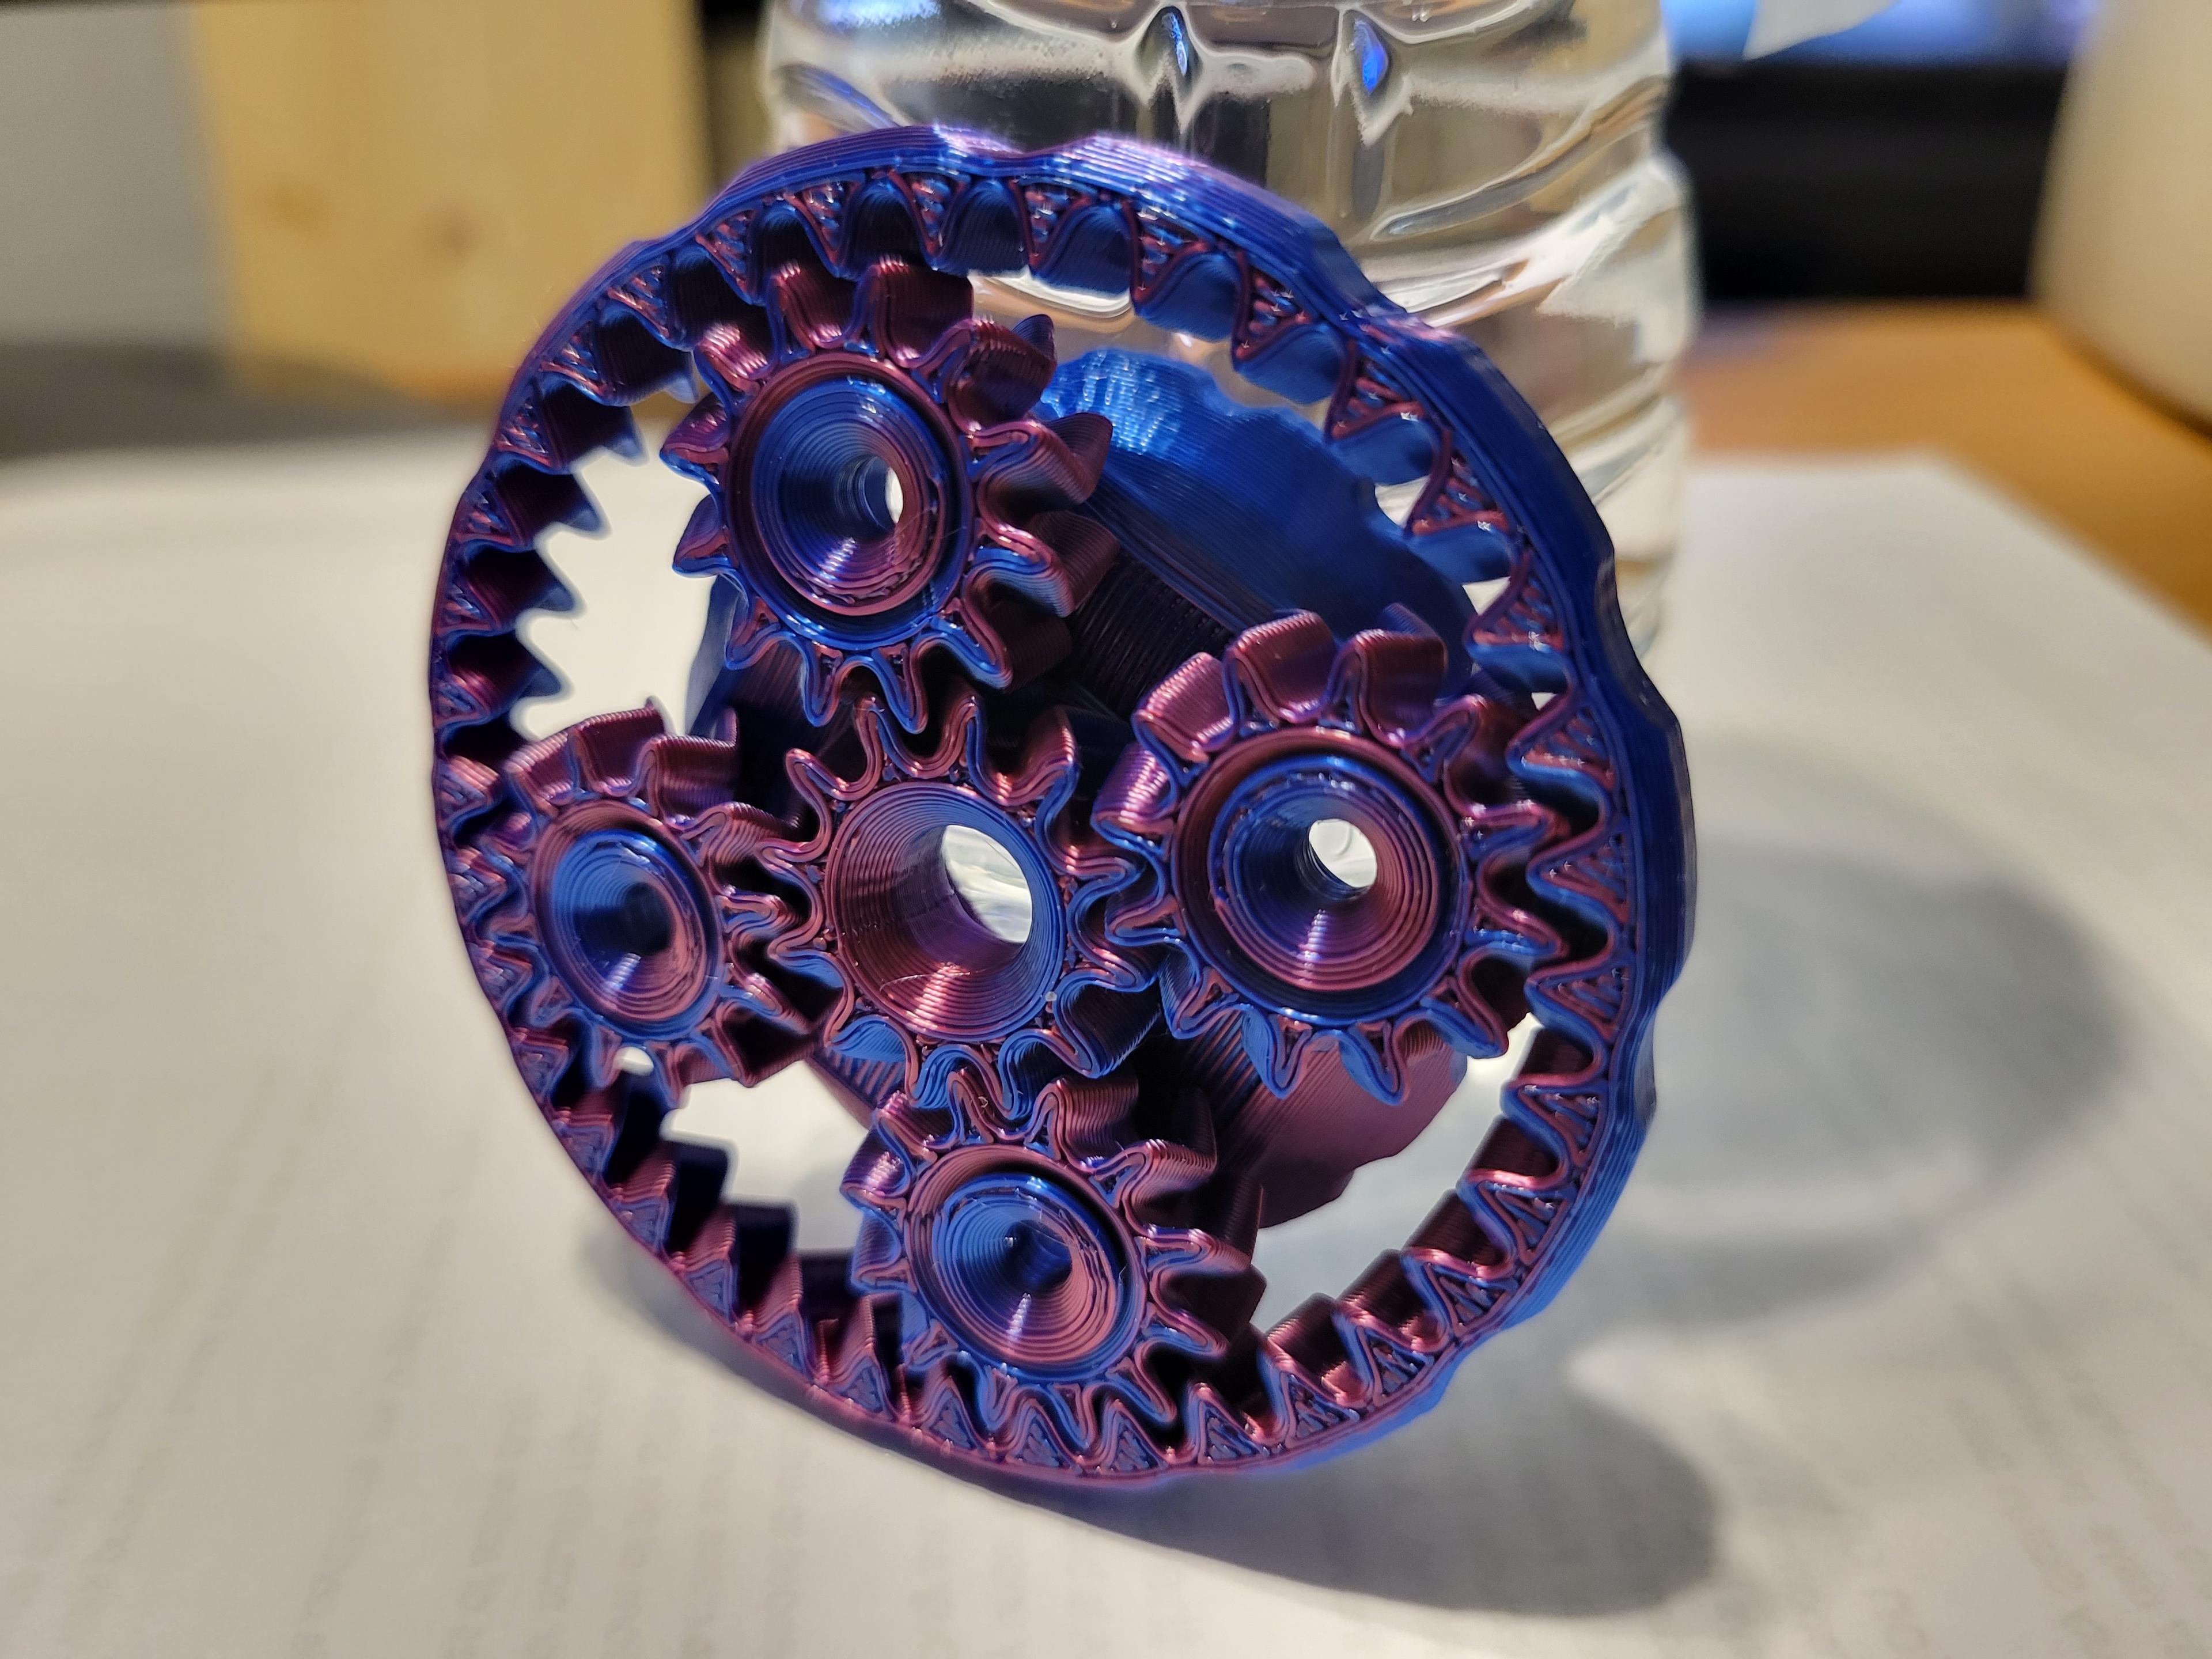 Mini Planetary Gear Print-in-Place Demo - Prusa MK3S+ 2 hr 59 m, 0.2 layer height, 0.4 nozzle - 3d model